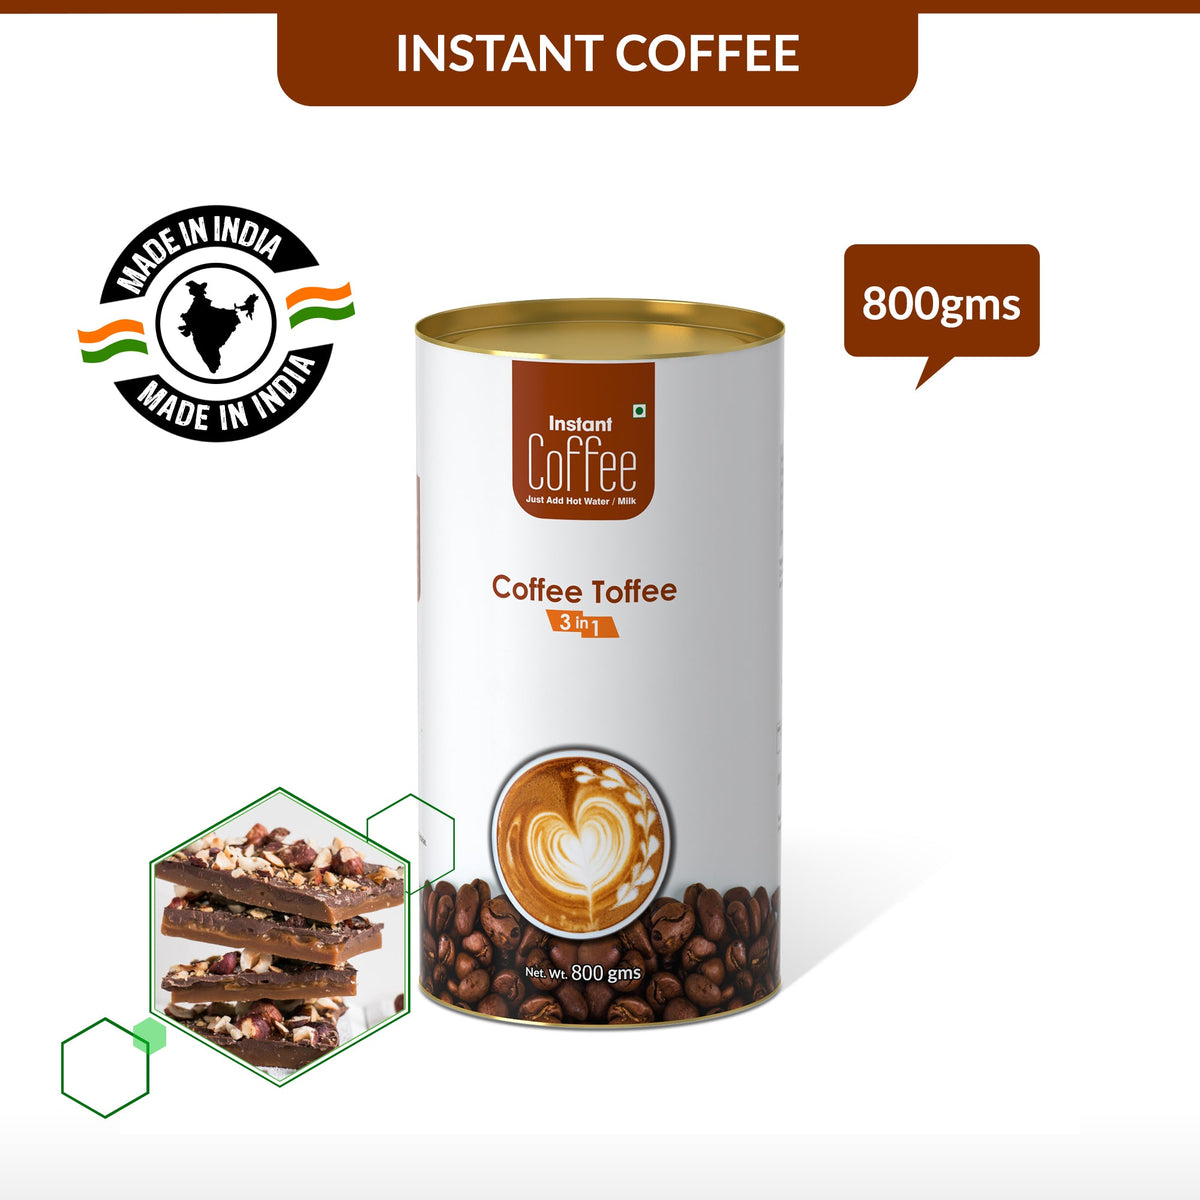 Coffee Toffee Instant Coffee Premix (3 in 1)